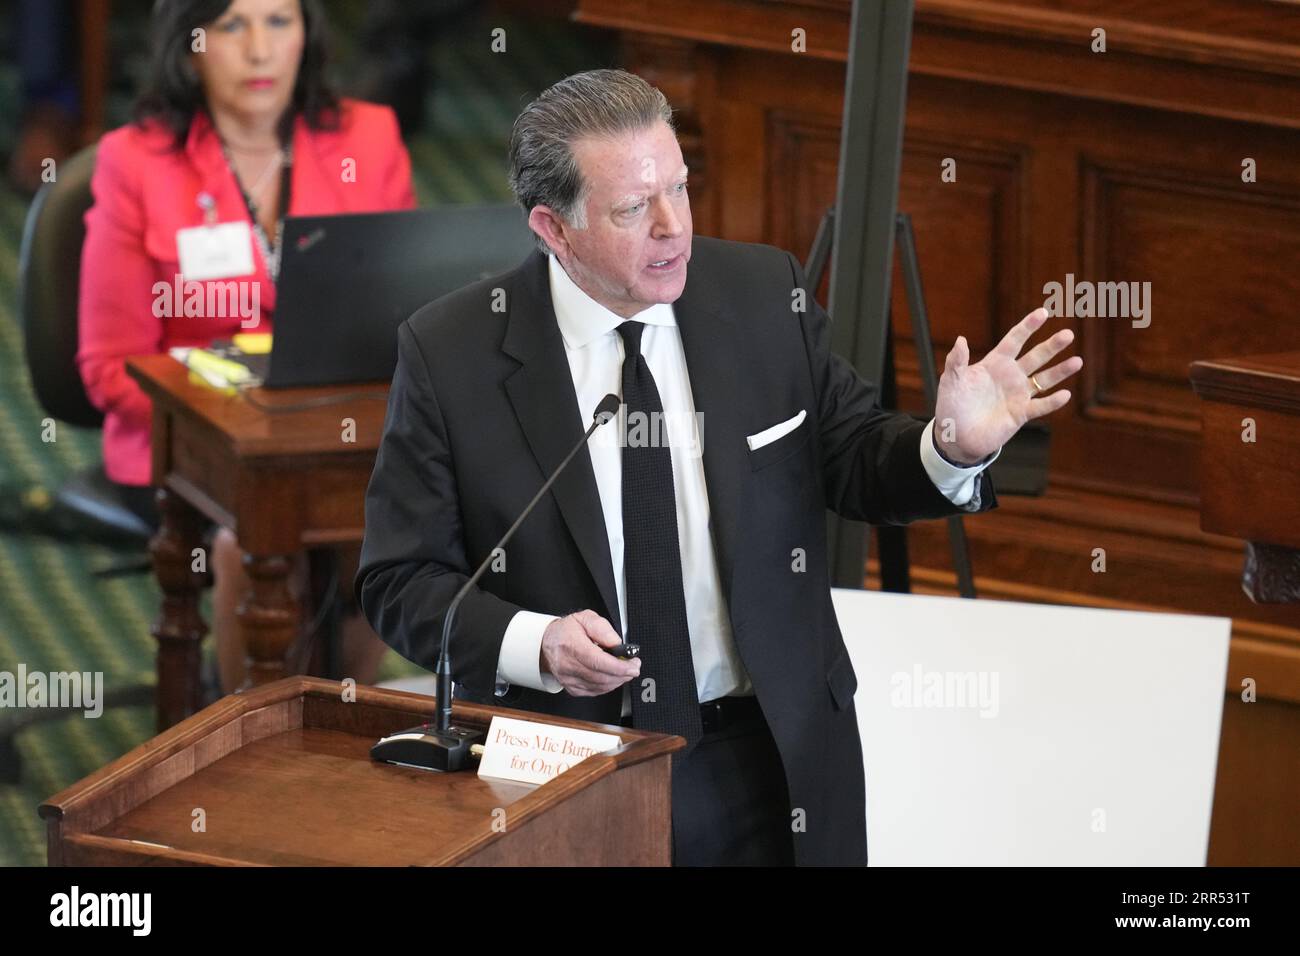 Defense attorney Dan Cogdell gives opening arguments during the afternoon session of Day 1 of the Ken Paxton impeachment trial in the Texas Senate. Stock Photo